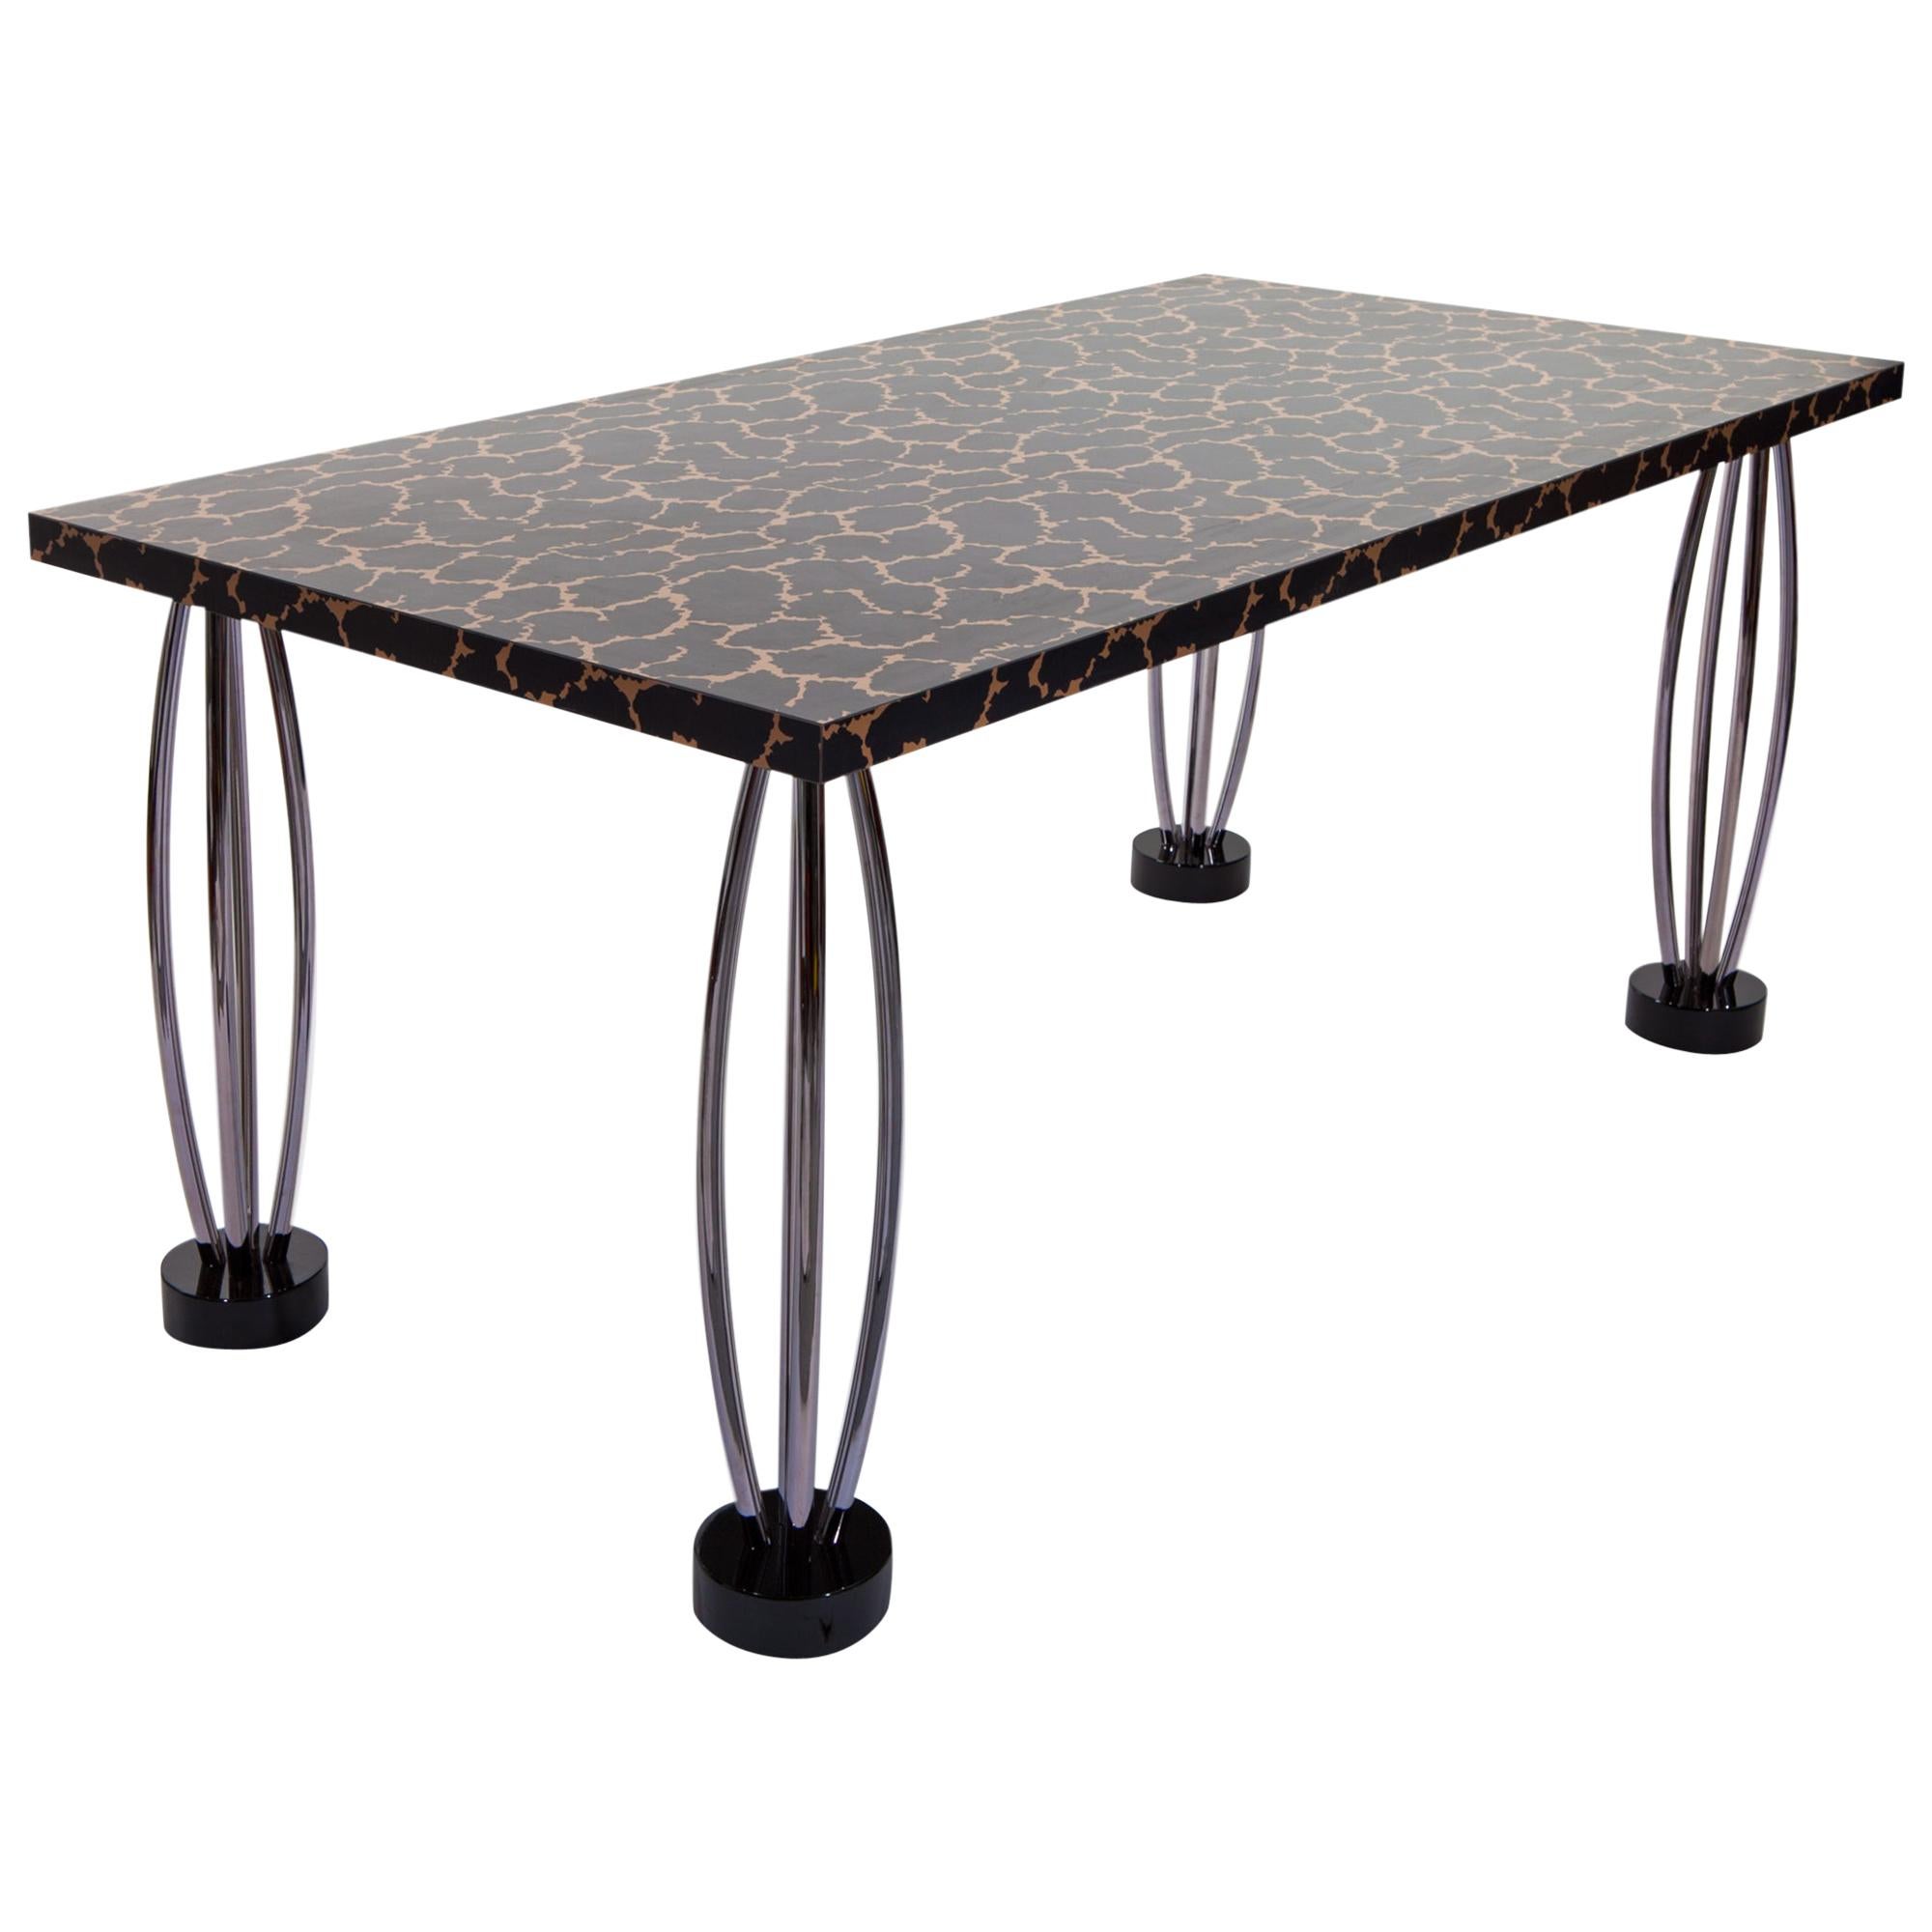 City Chrome-Plated Steel Table, by Ettore Sottsass for Memphis Milano Collection For Sale